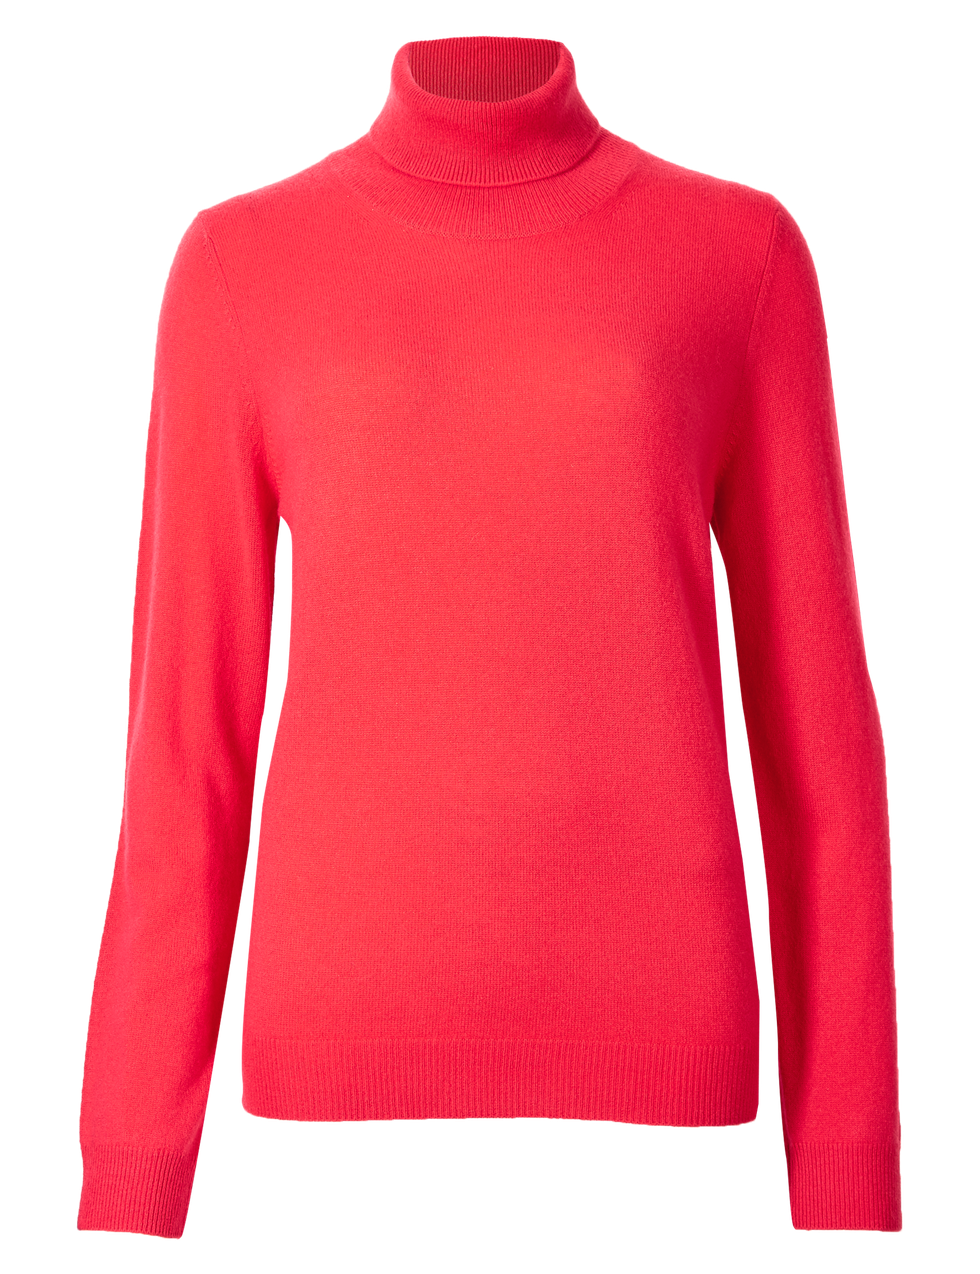 Clothing, Sleeve, Neck, Sweater, Red, Pink, Outerwear, Wool, Orange, Long-sleeved t-shirt, 